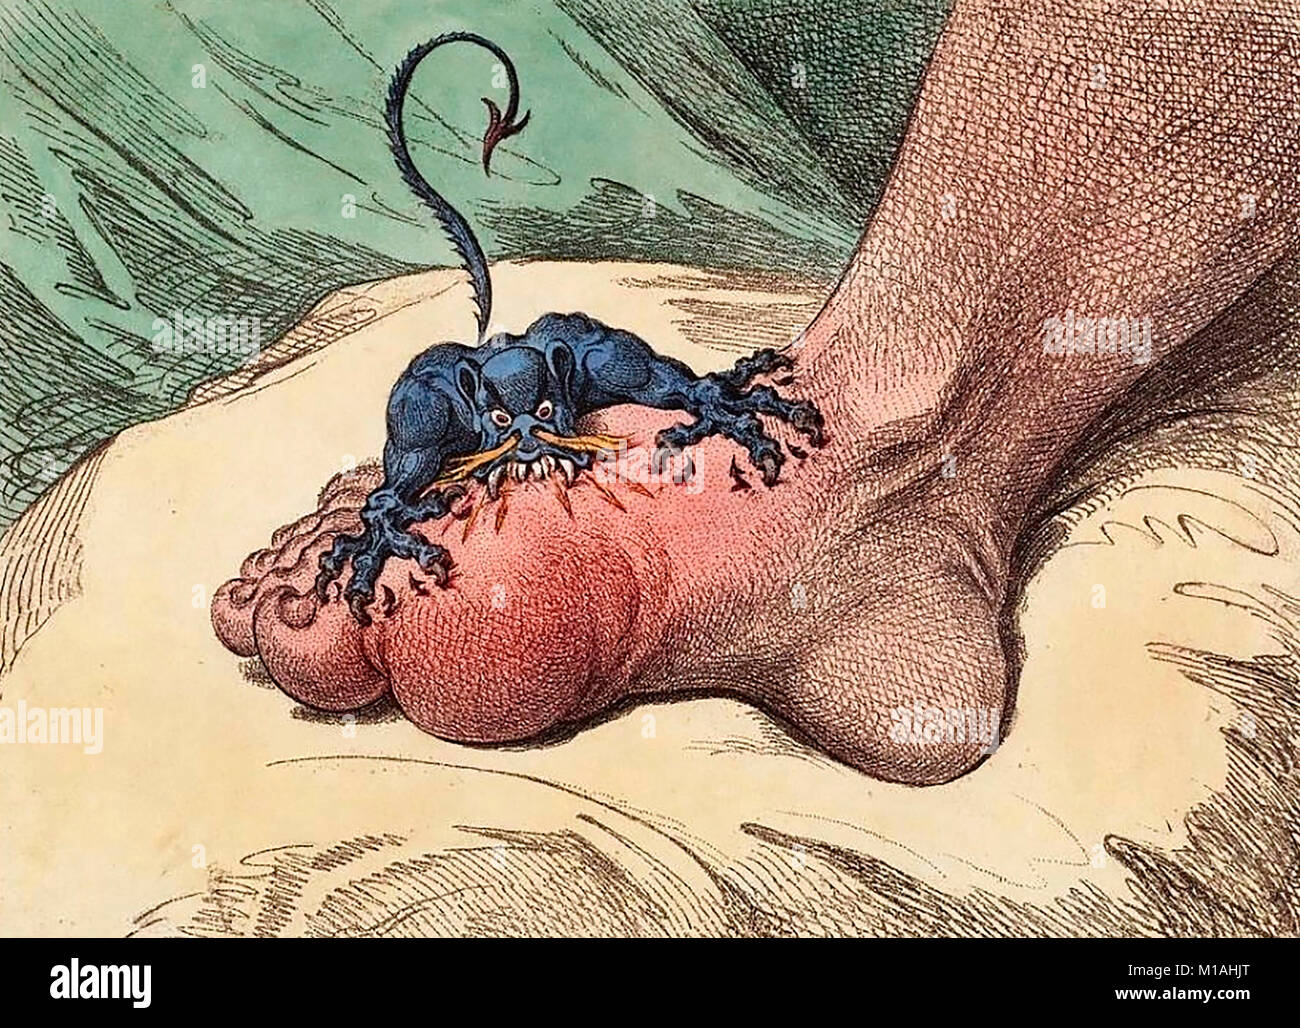 The Gout by James Gillray - Illustration showing the painful attack of gout Stock Photo